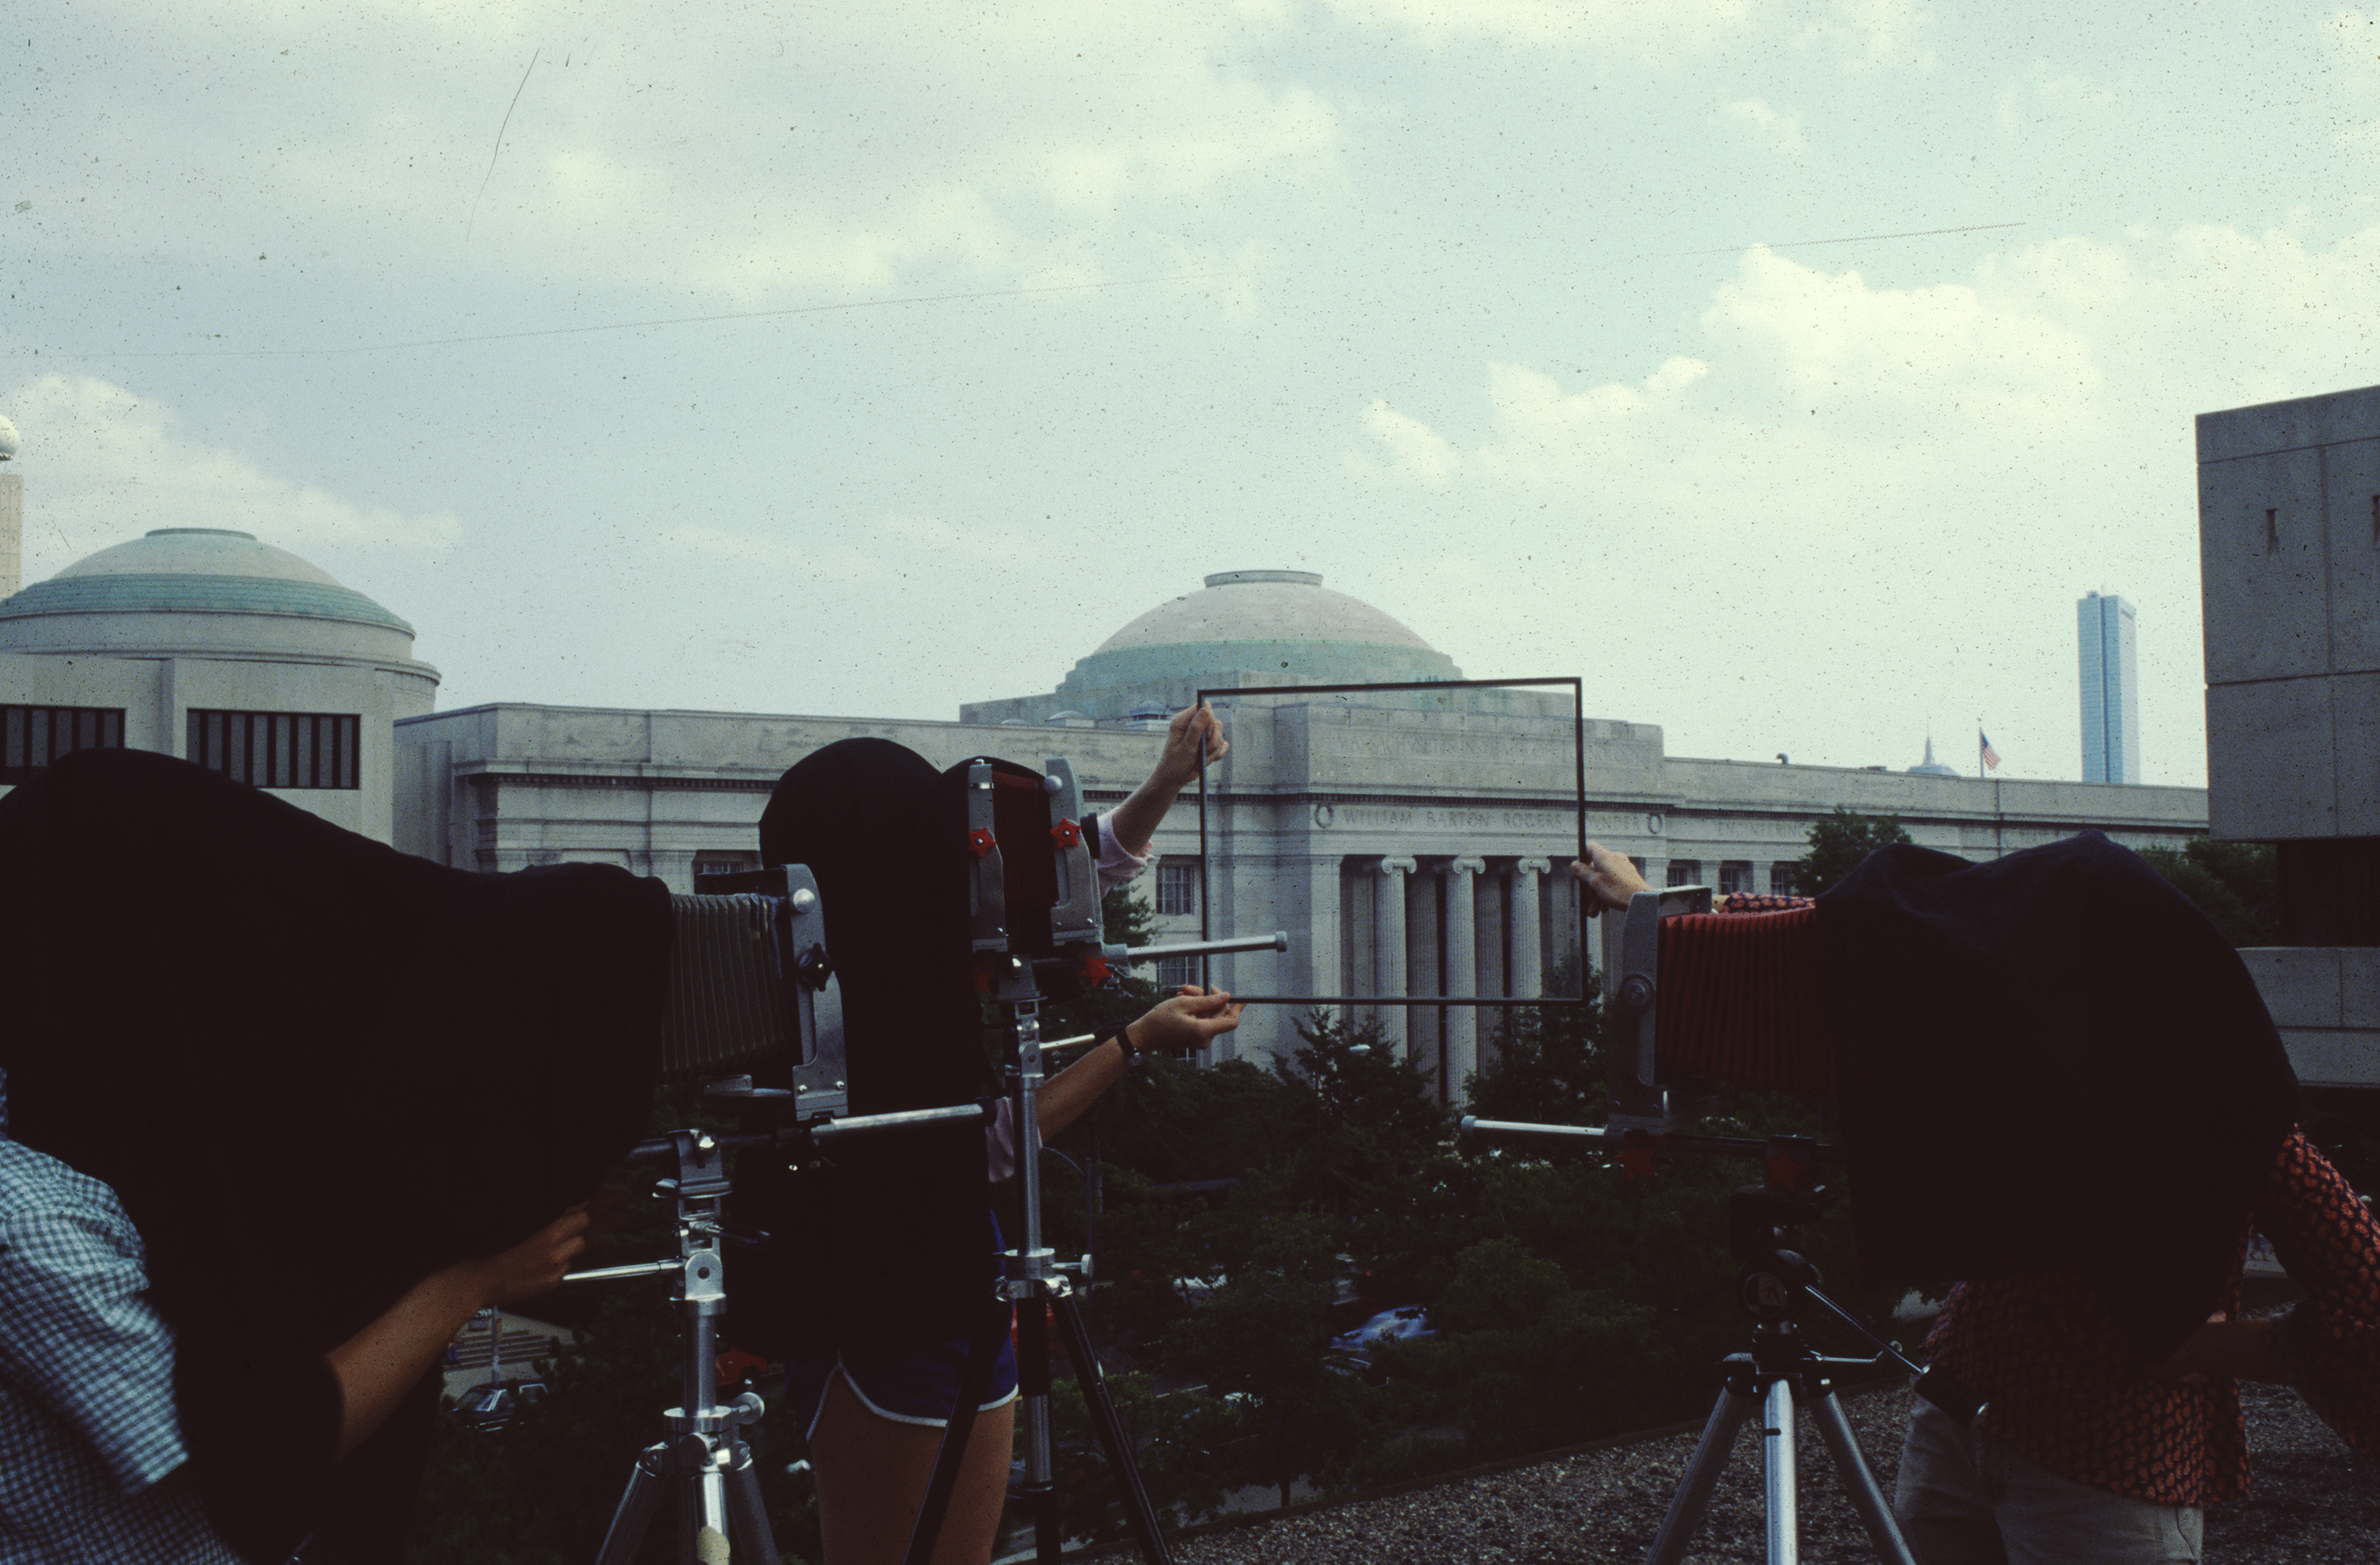 Archival photo of a group of students using photography equipment in front of MIT's Great Dome